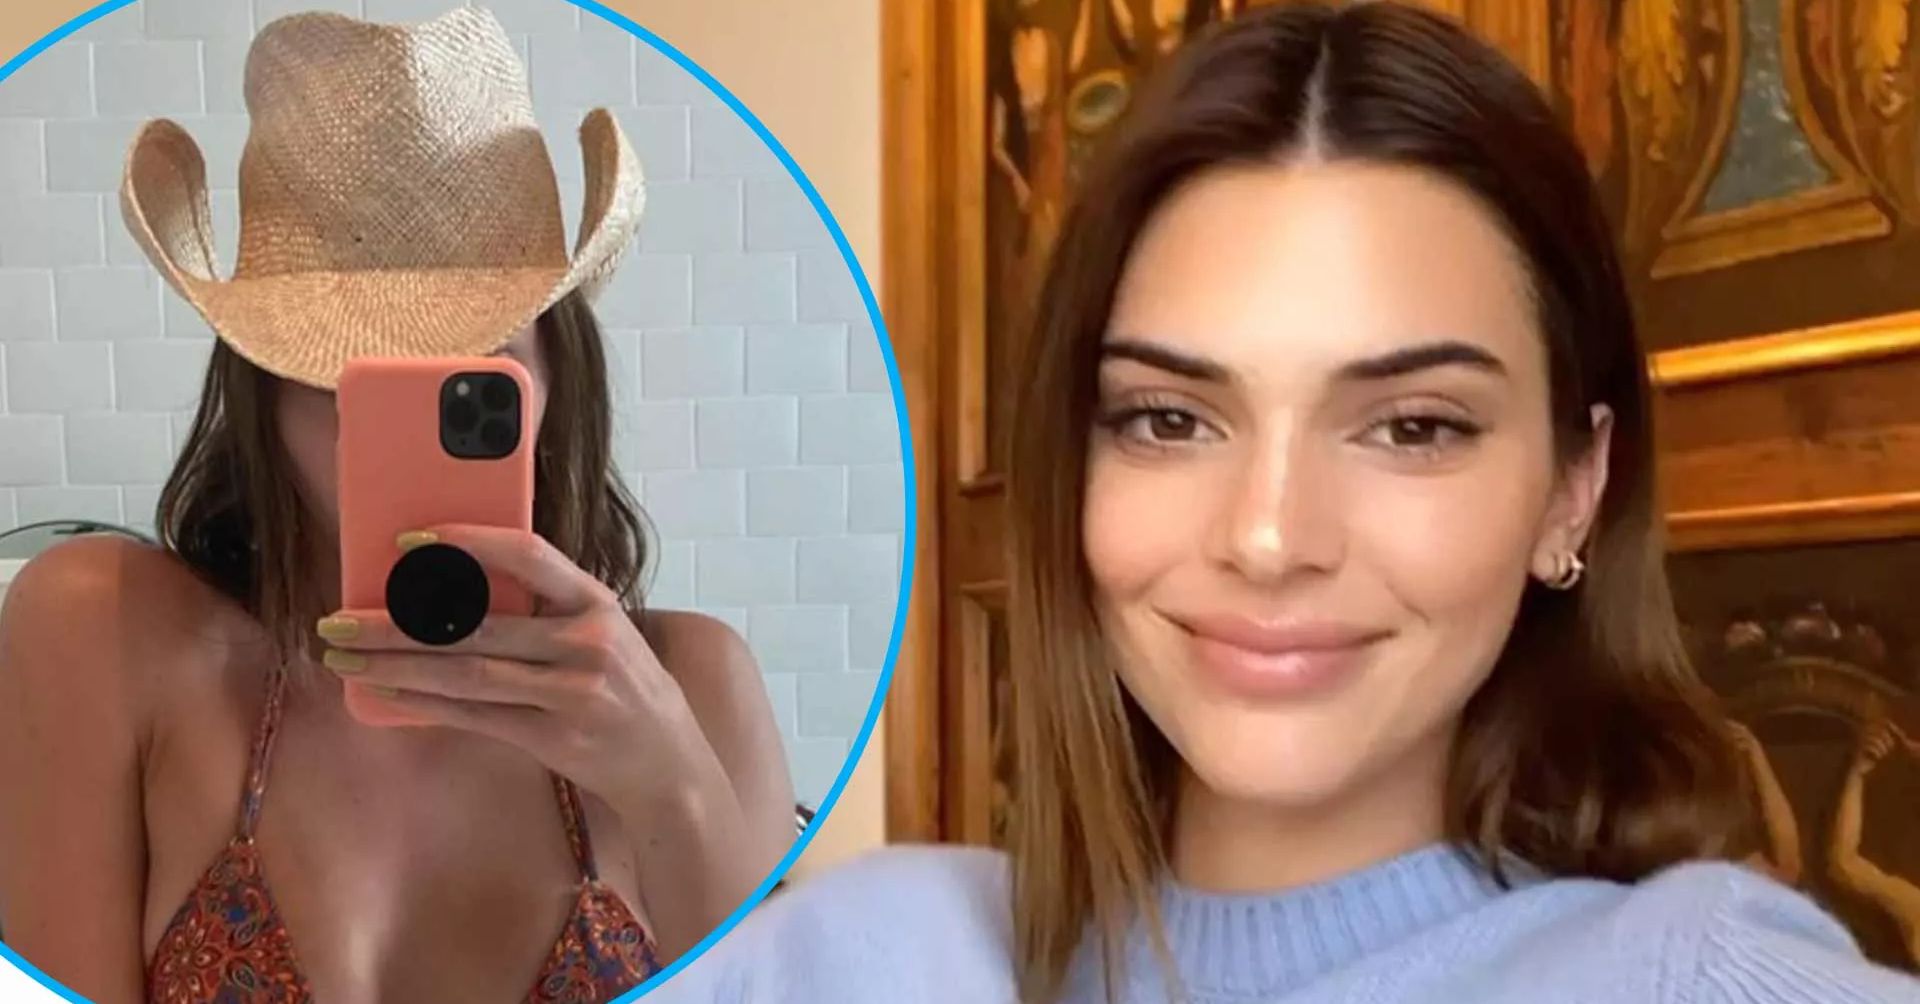 Kendall Jenner Saddles Up A Sultry Bikini Cowgirl Selfie - The Blast